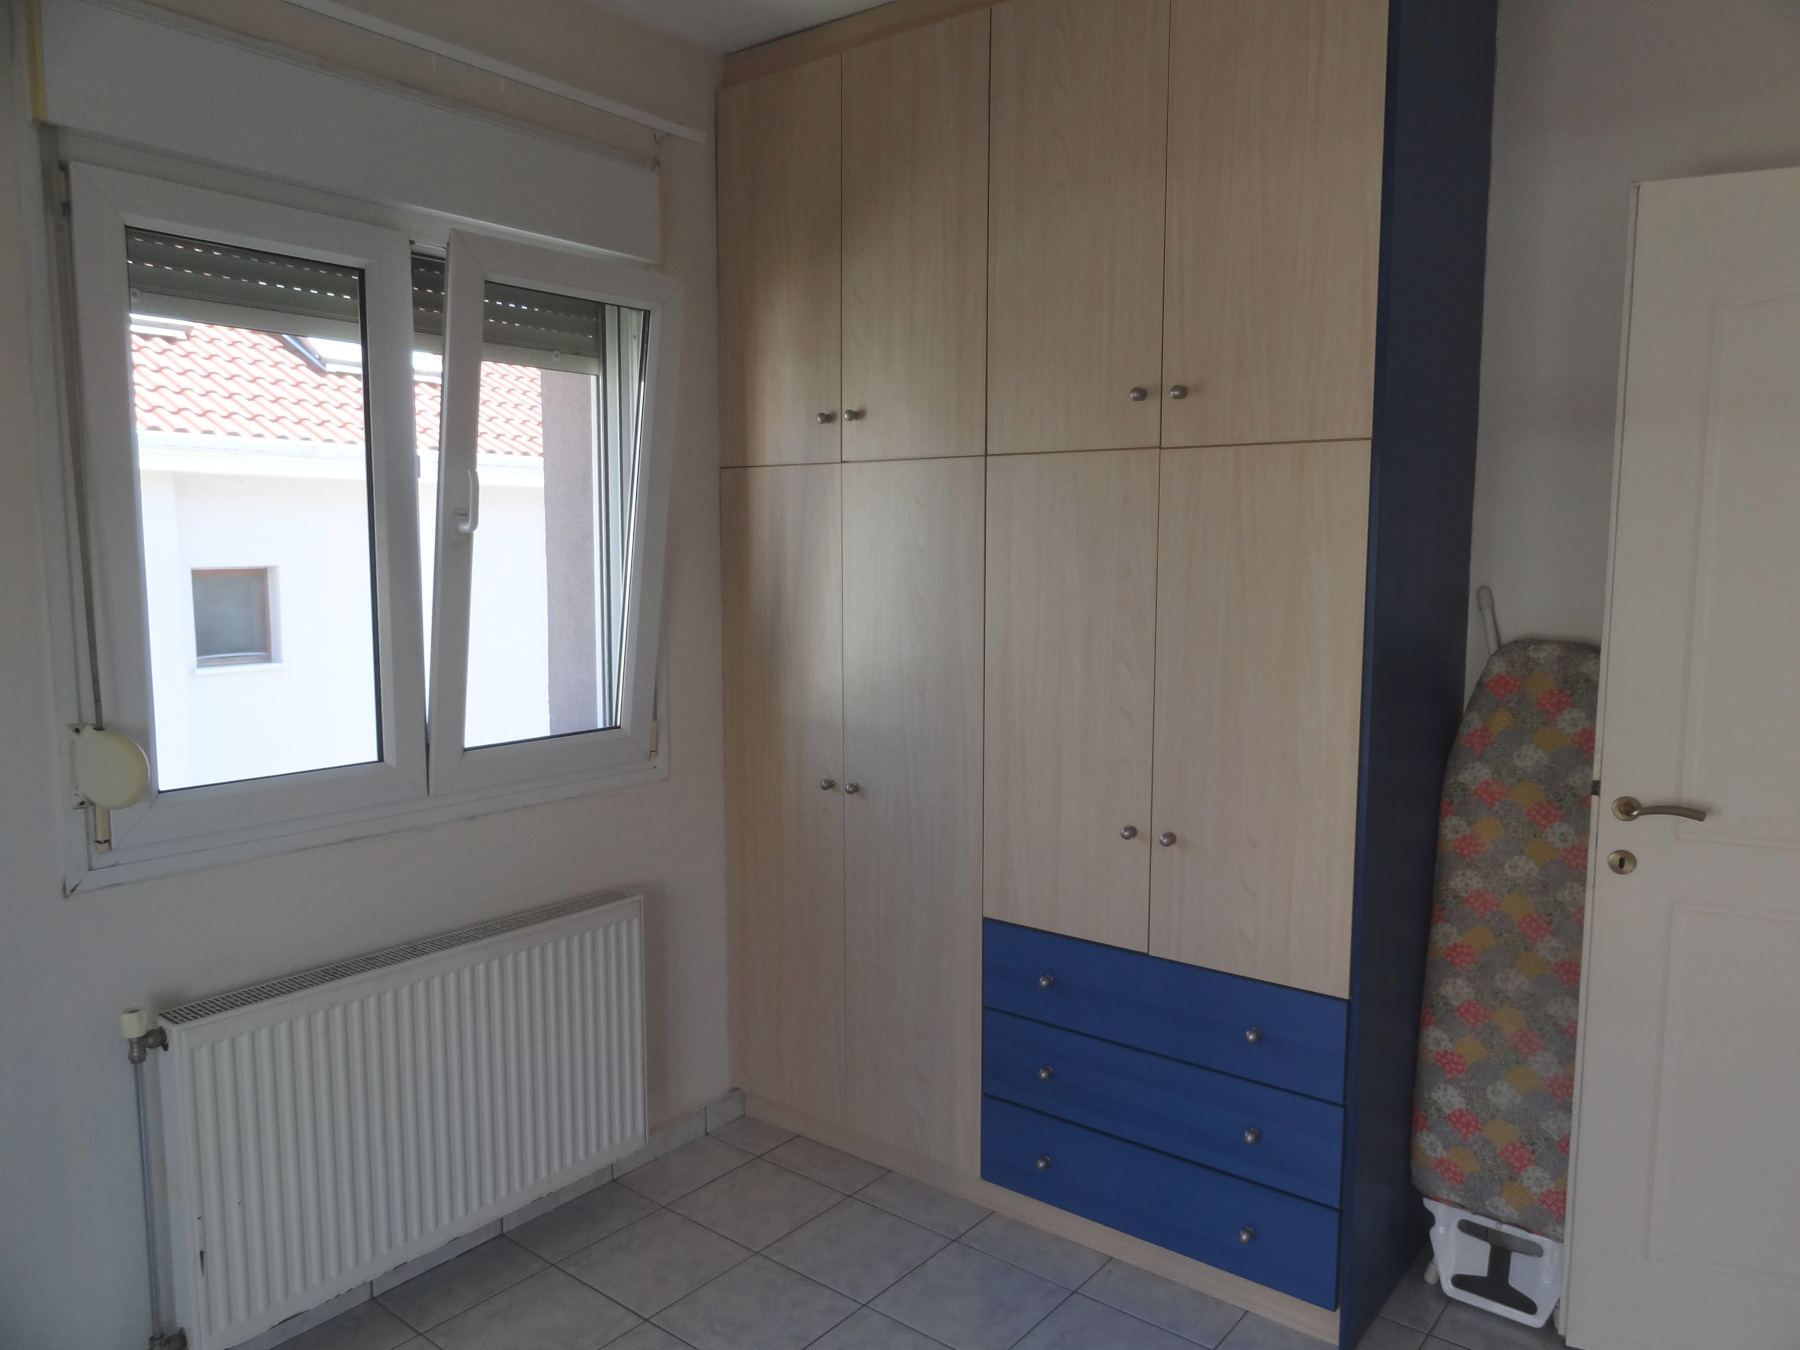 Two-room studio for rent, 30 sq.m. 2nd floor in the area of Agia Sophia in the Anatoli of Ioannina